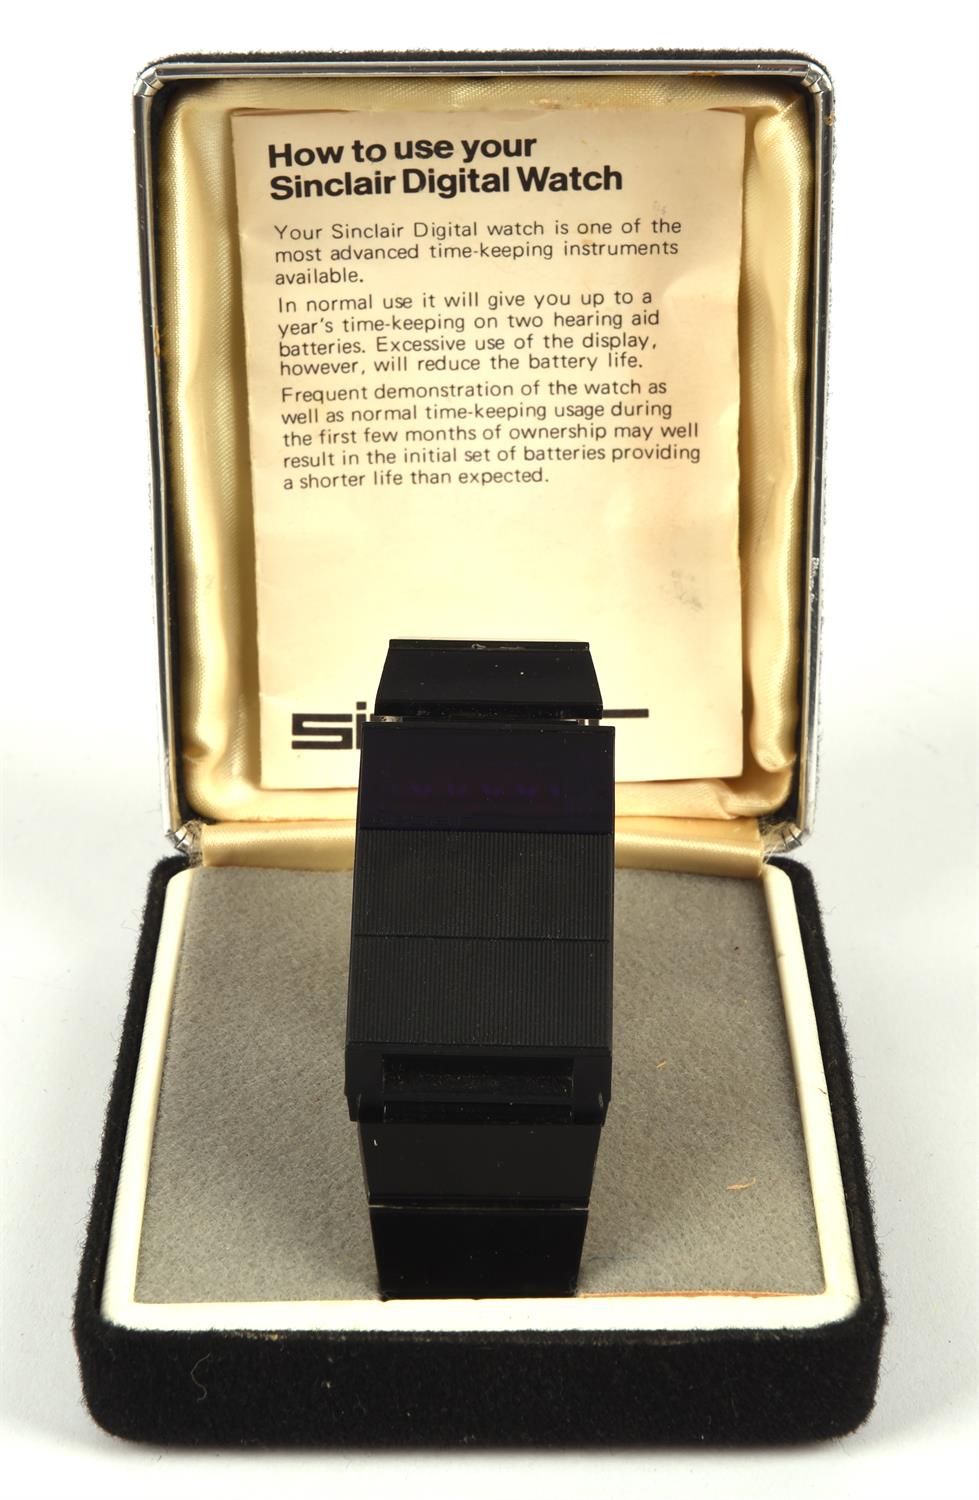 Sinclair Radionics, a black Sinclair watch, in case, with instruction book - Image 2 of 5